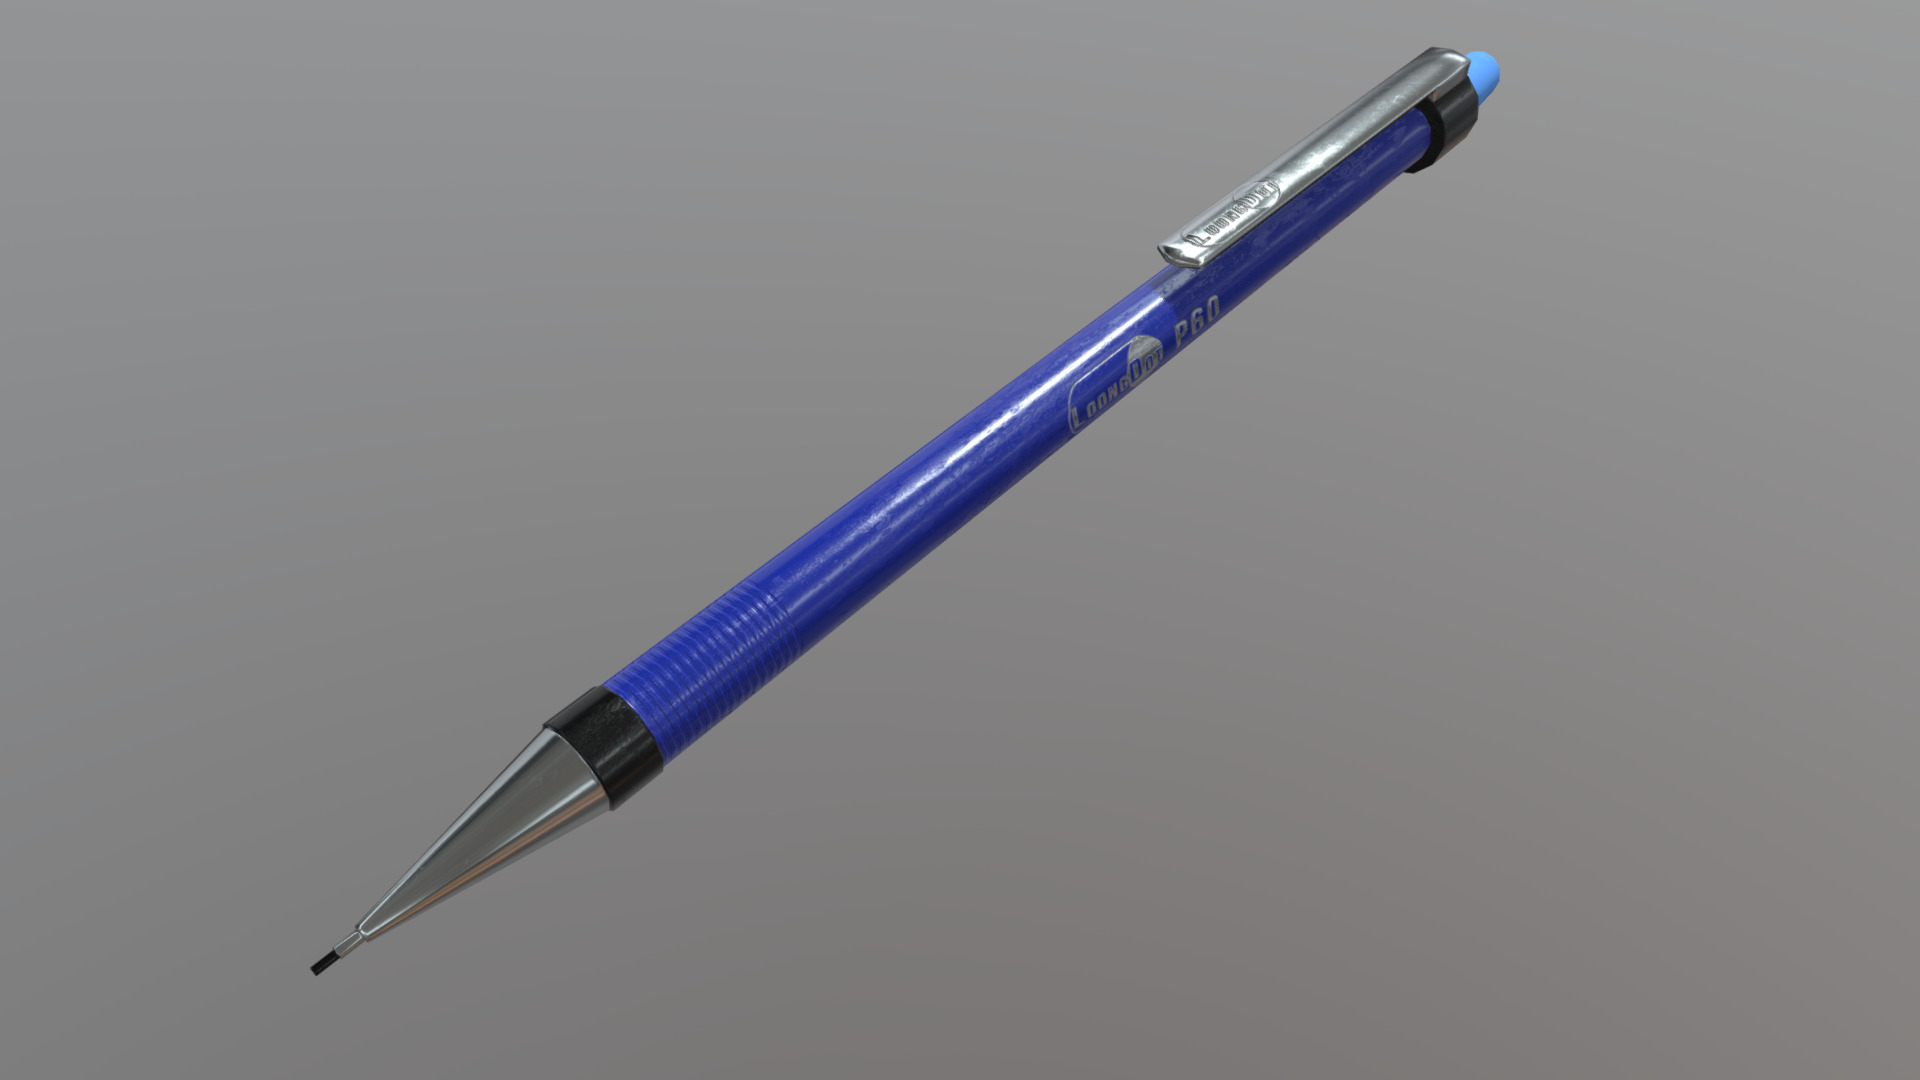 3D model Pen 2 - This is a 3D model of the Pen 2. The 3D model is about a blue pen with a black cap.